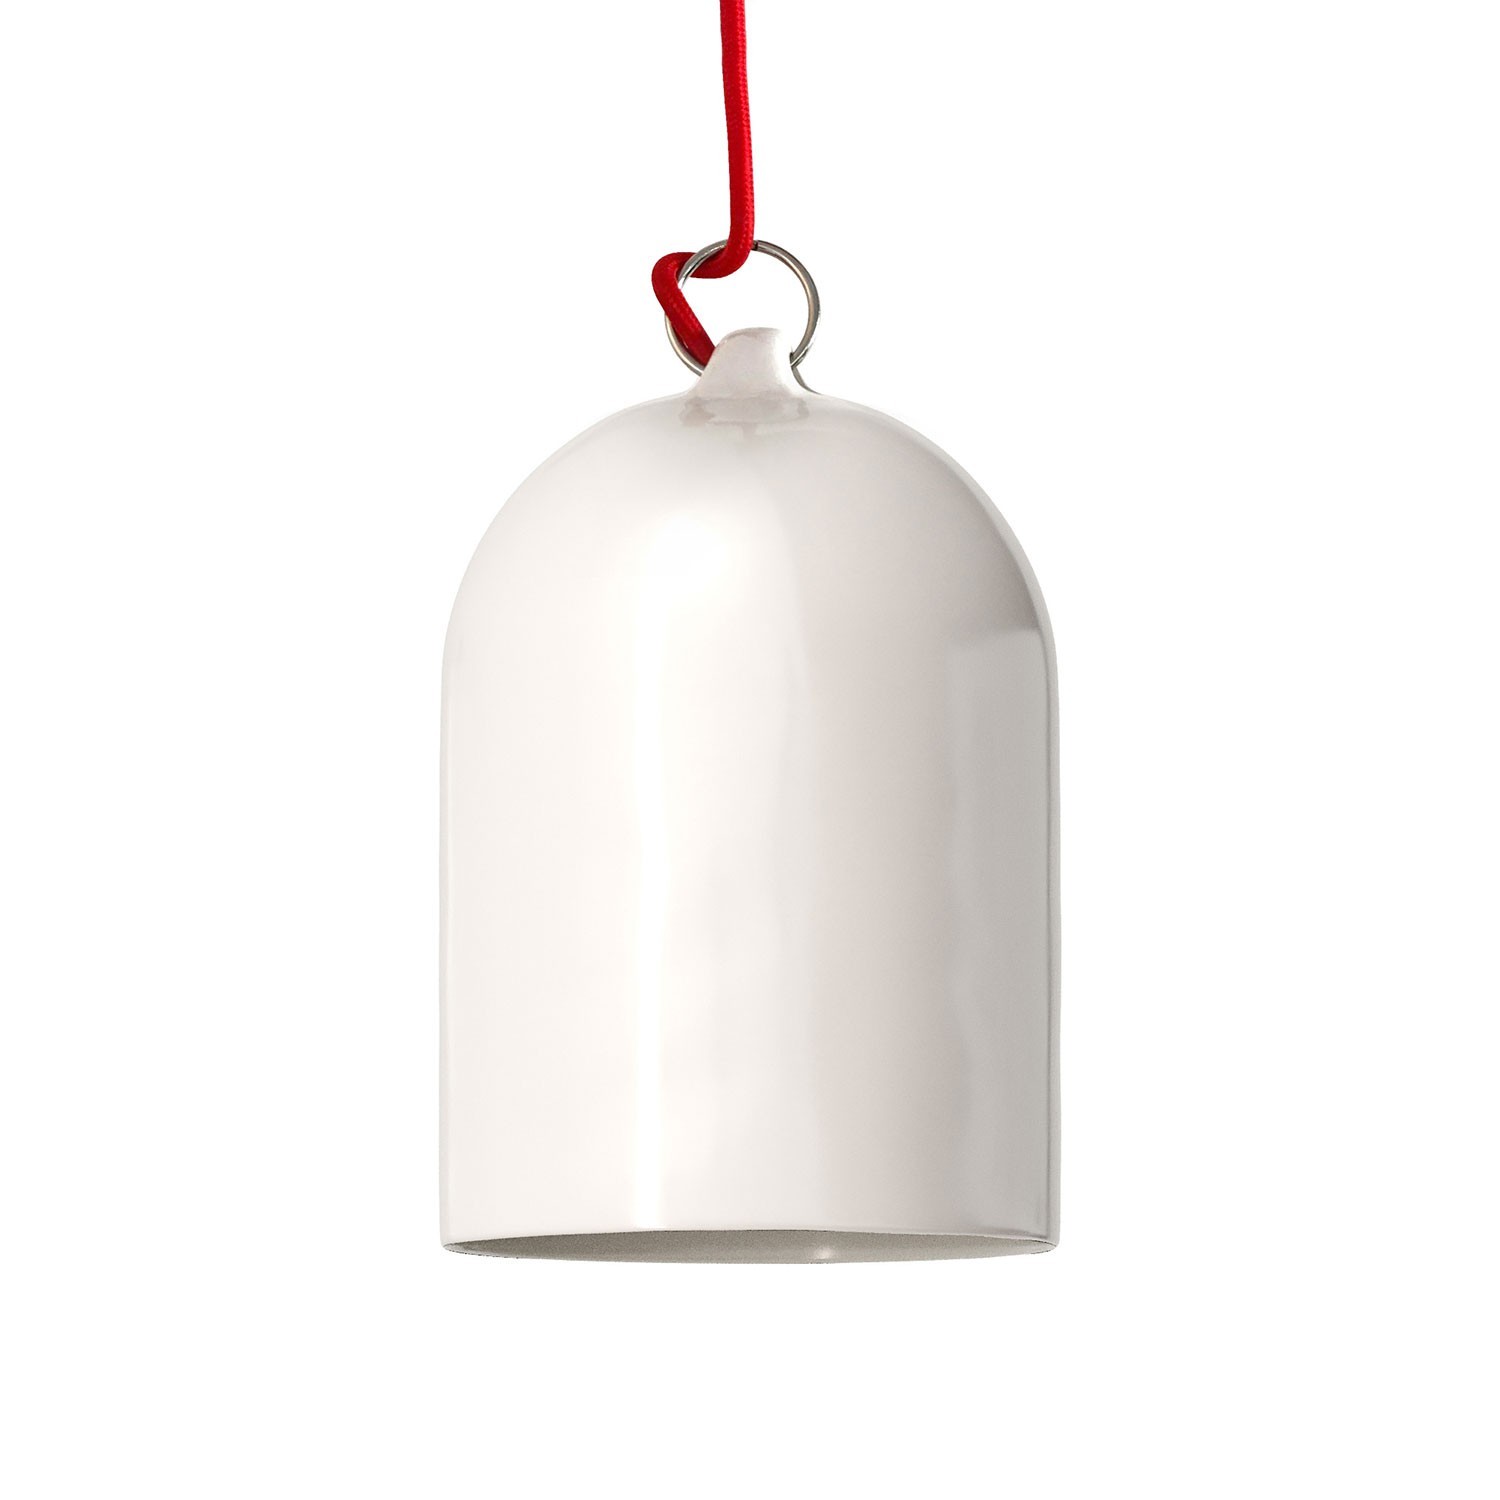 Pendant lamp with textile cable and lampshade Mini Bell XS ceramic shade - Made in Italy - Bulb included